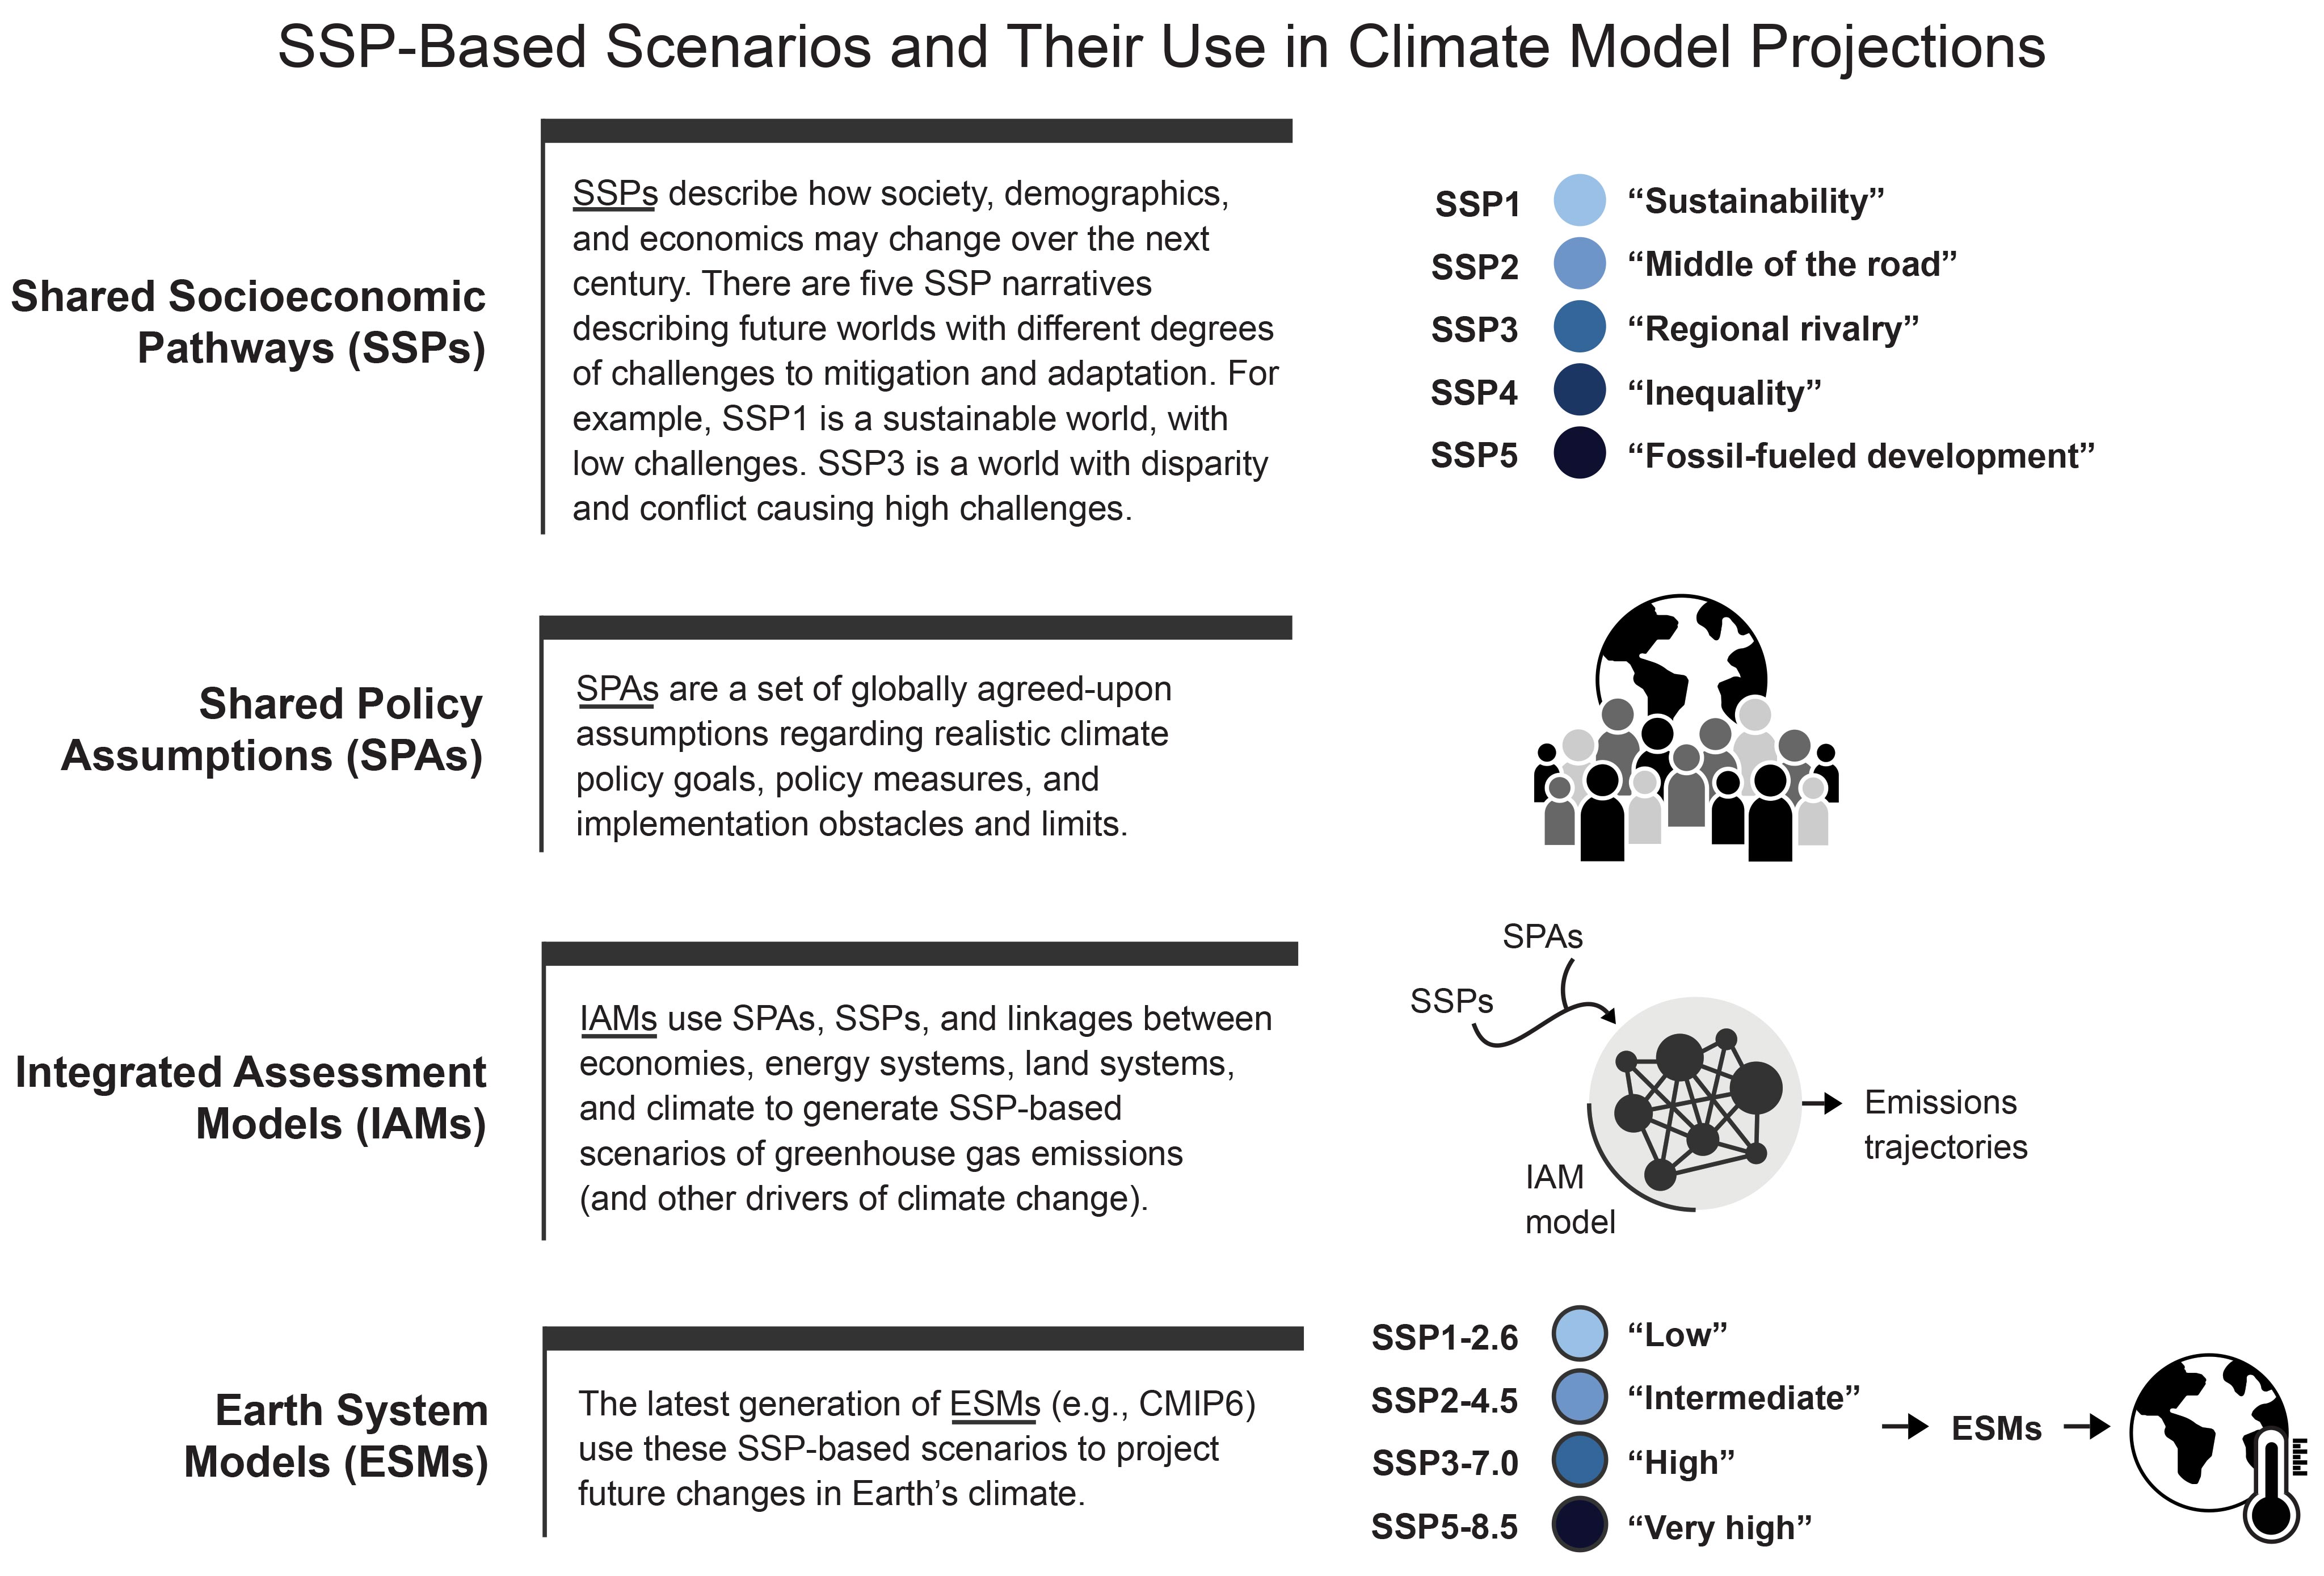 SSP-Based Scenarios and Their Use in Climate Model Projections